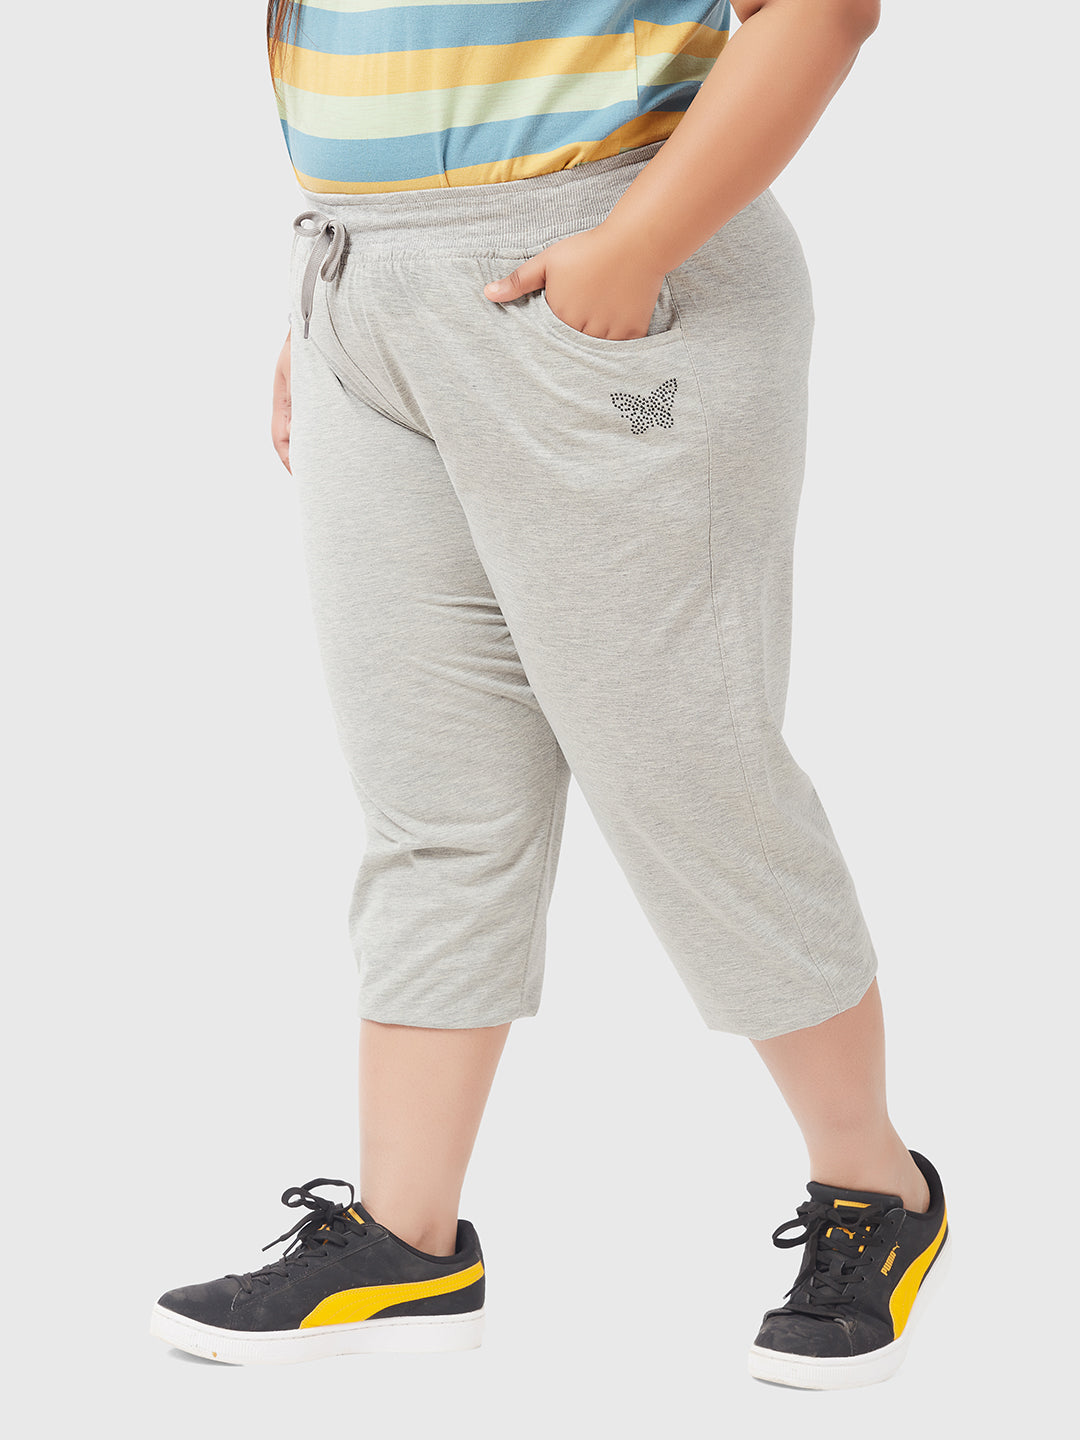 Stylish Grey Cotton Half Capris For Women online in India